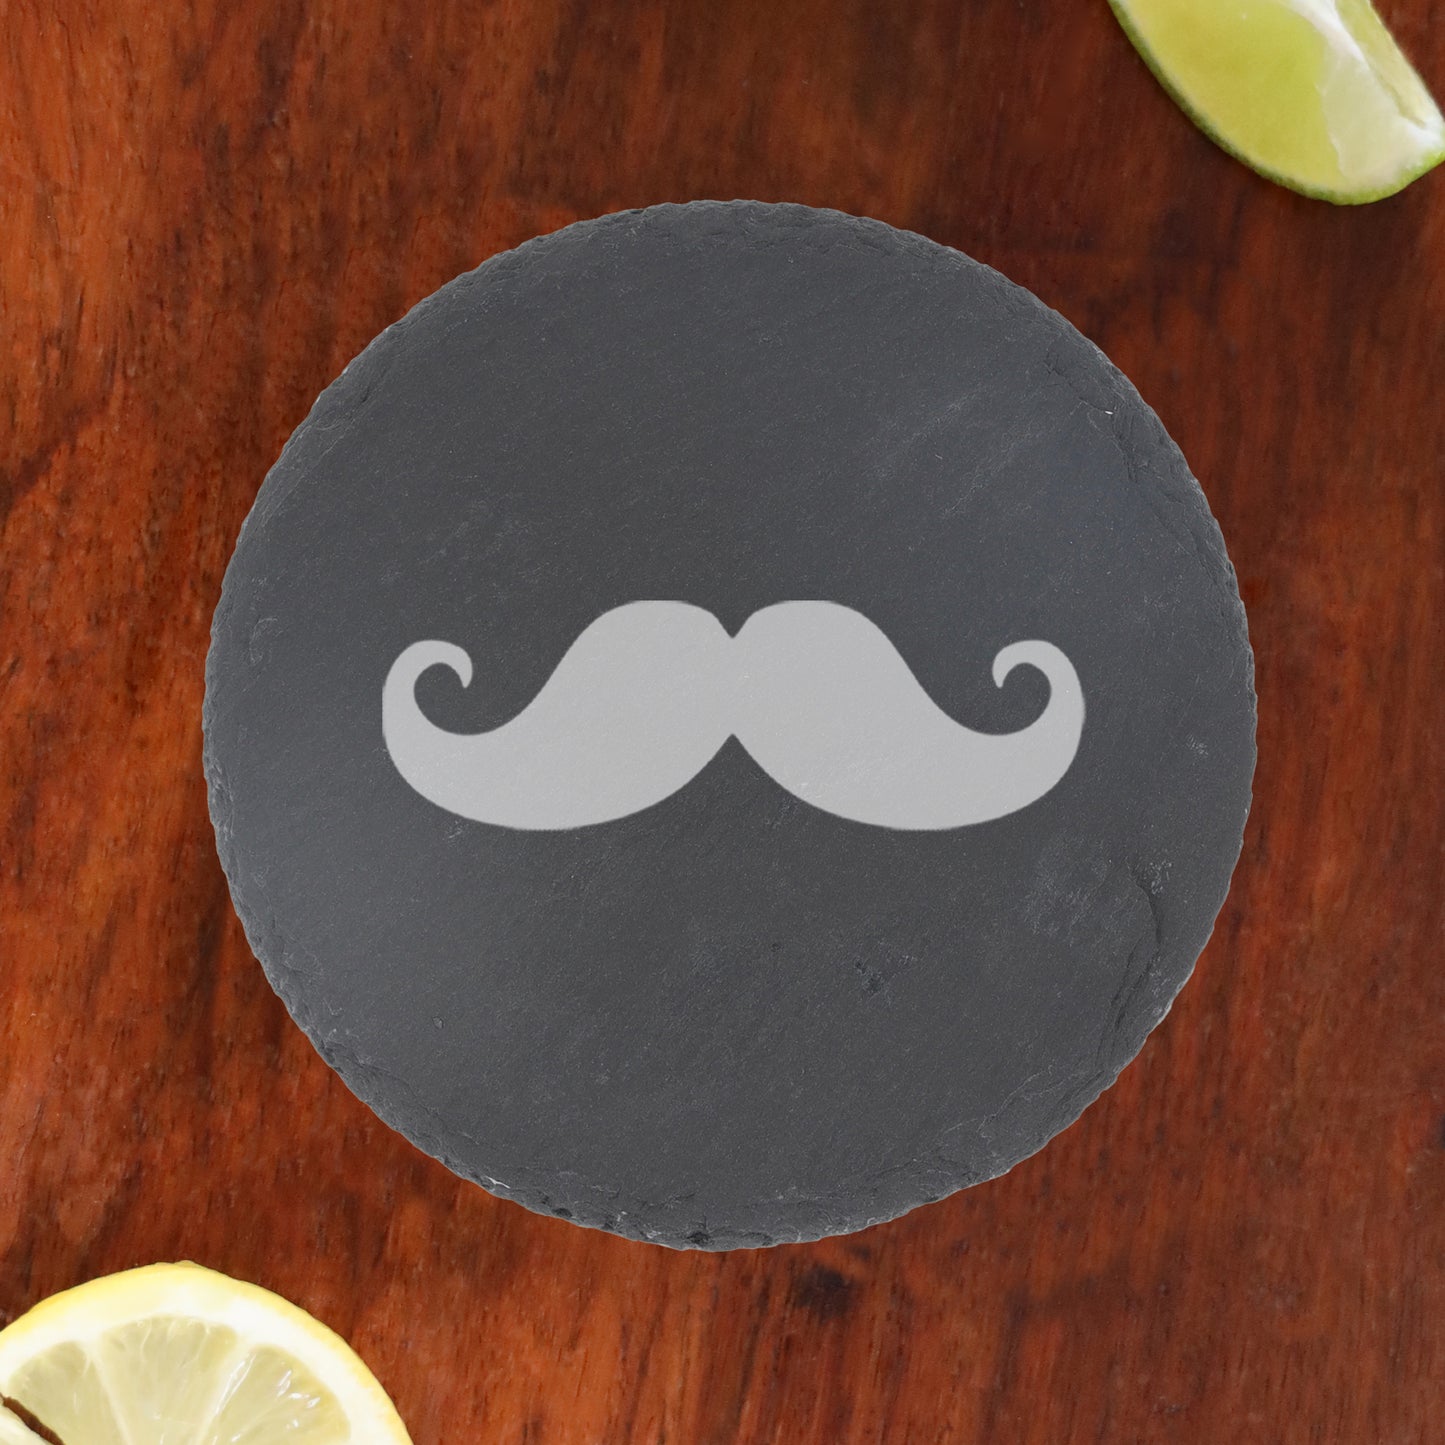 Engraved Funny Wine Glass Moustache Glass and/or Coaster Gift  - Always Looking Good -   